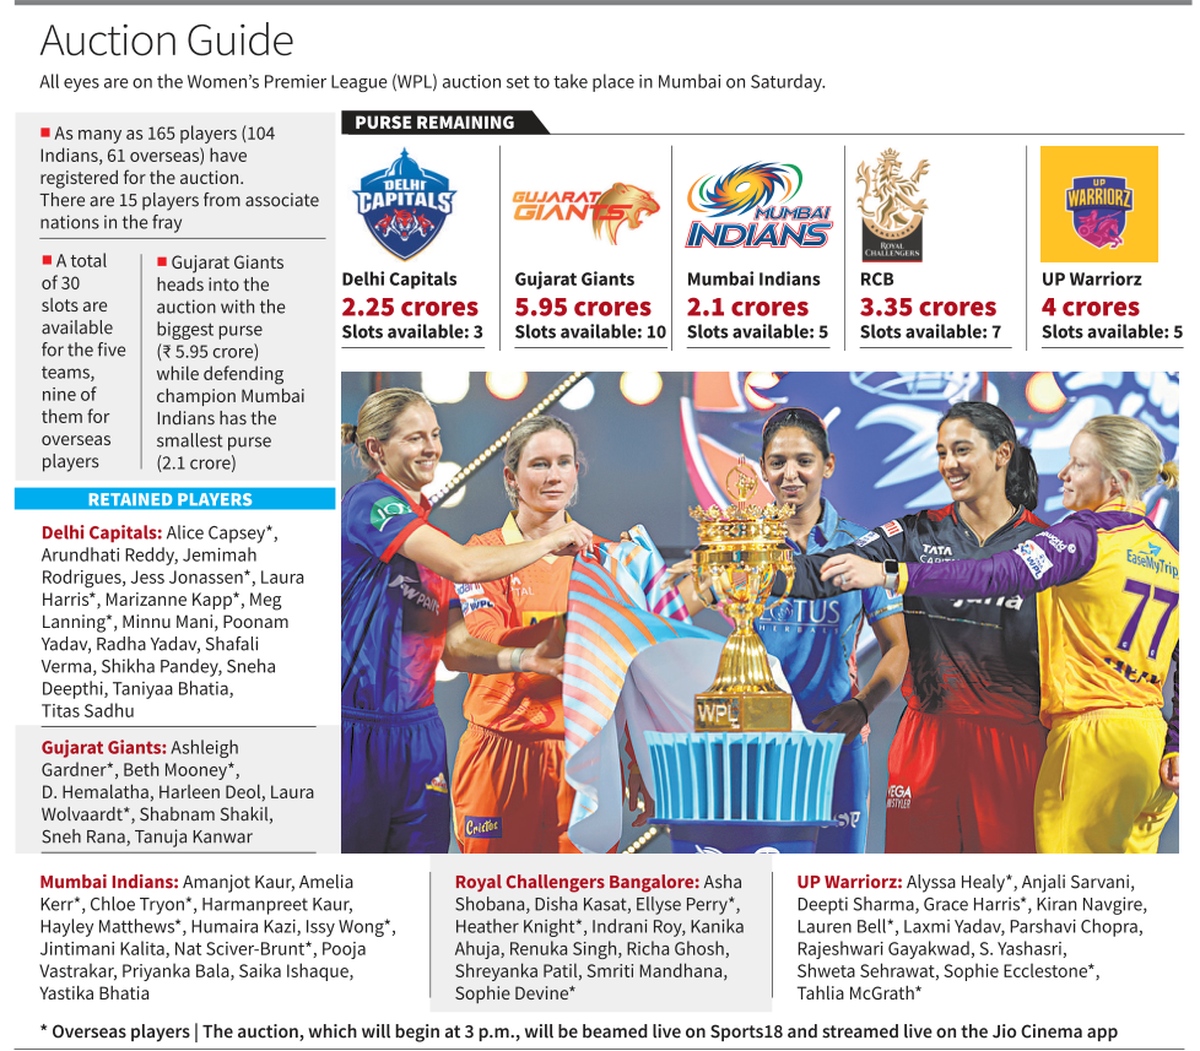 IPL 2020 auction: When and where to watch, live streaming details here | IPL  2020 News - Business Standard